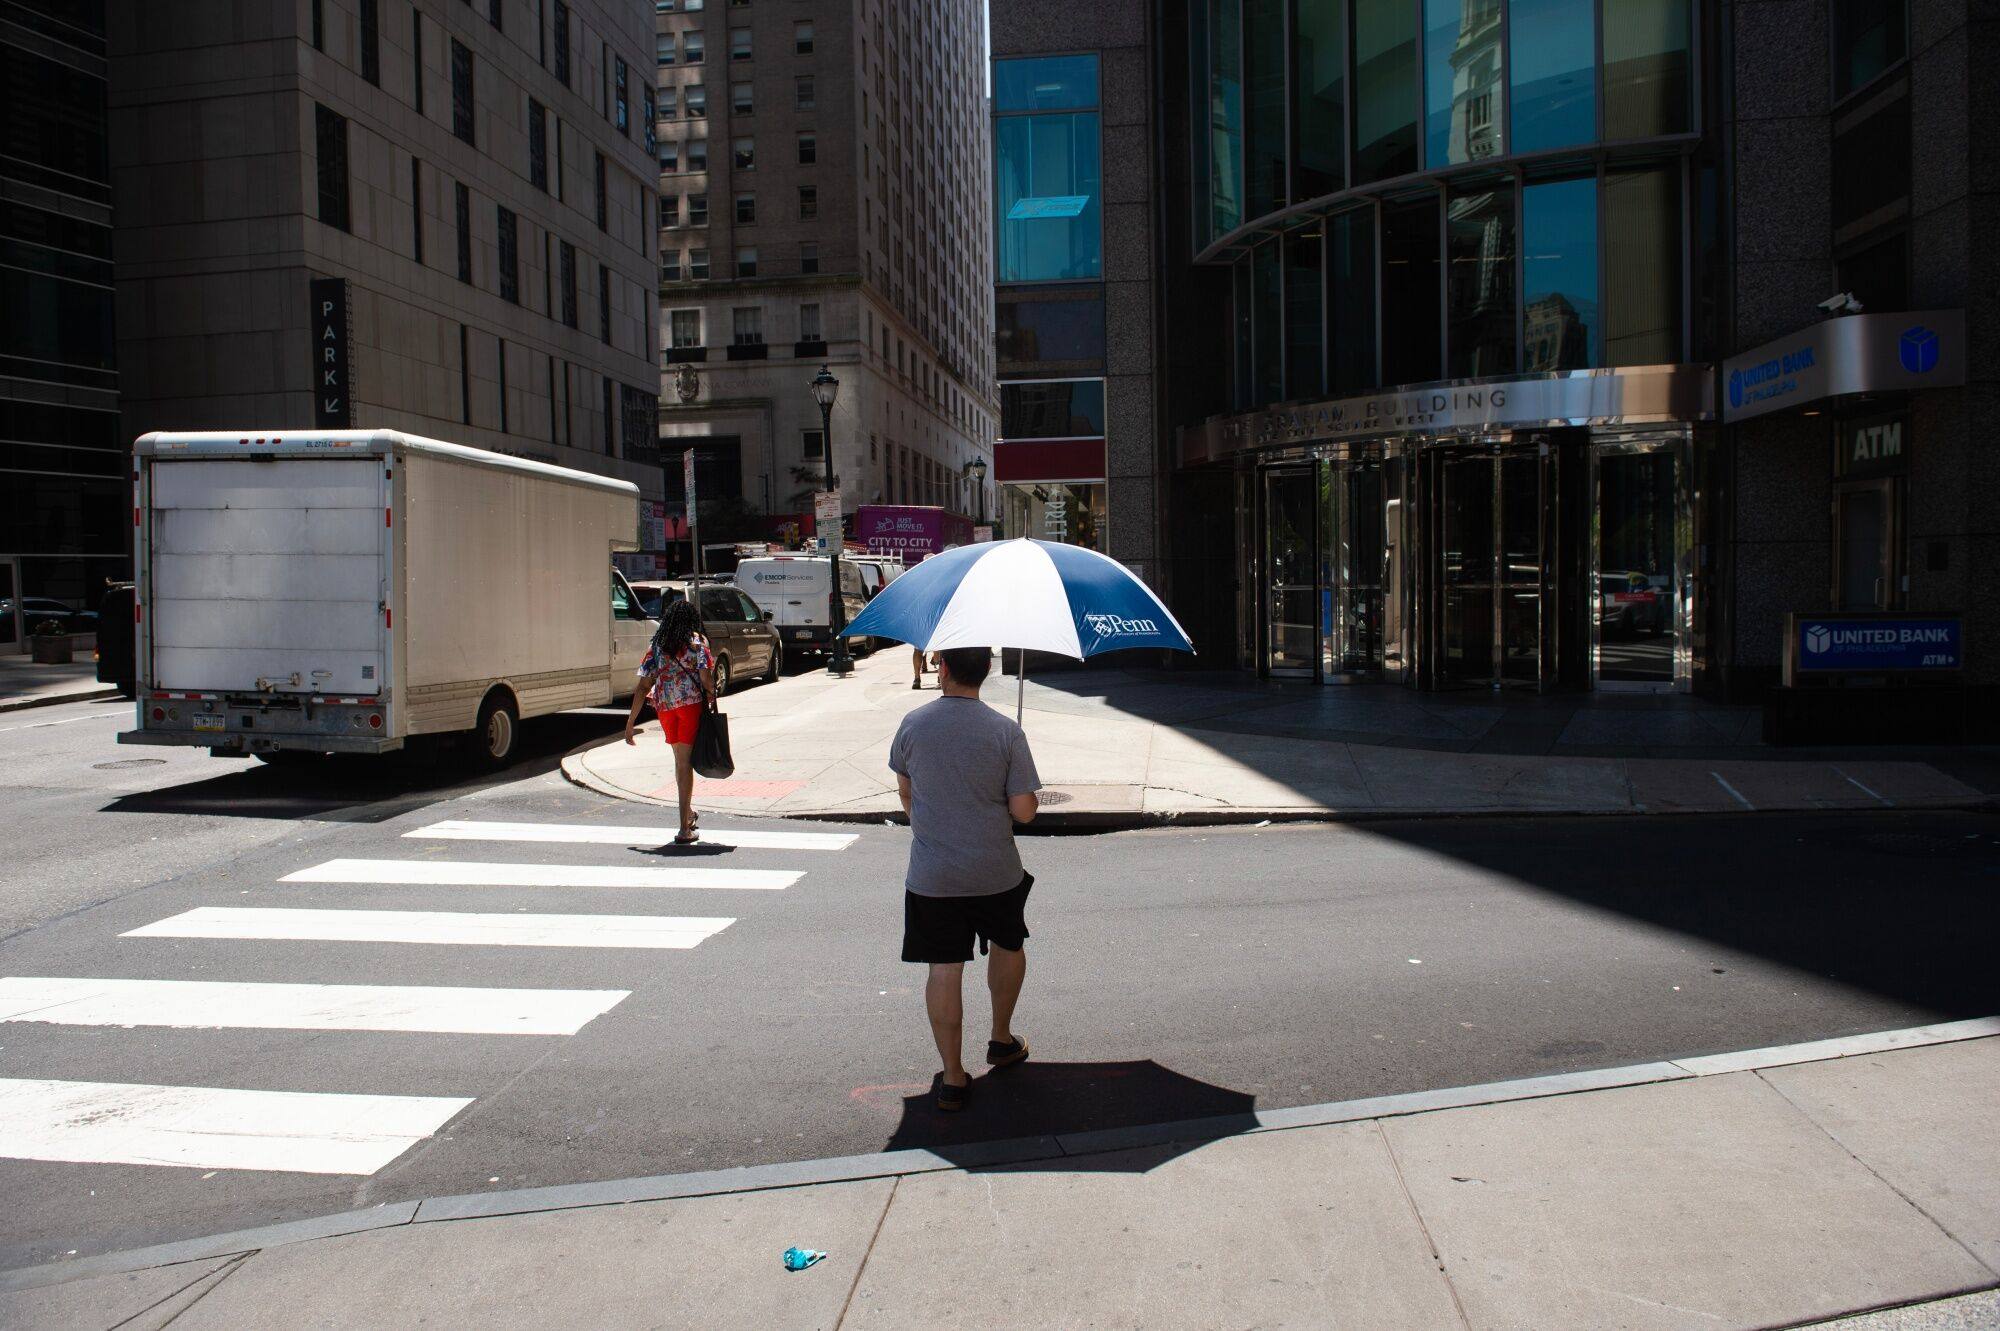 A pedestrian carries an umbrella to shade himself from the sun during a heatwave in Philadelphia, US, on July 28. The signs of a climate crisis should push us to seriously examine our unquestioned acceptance of economic growth as a public good. Photo: Bloomberg